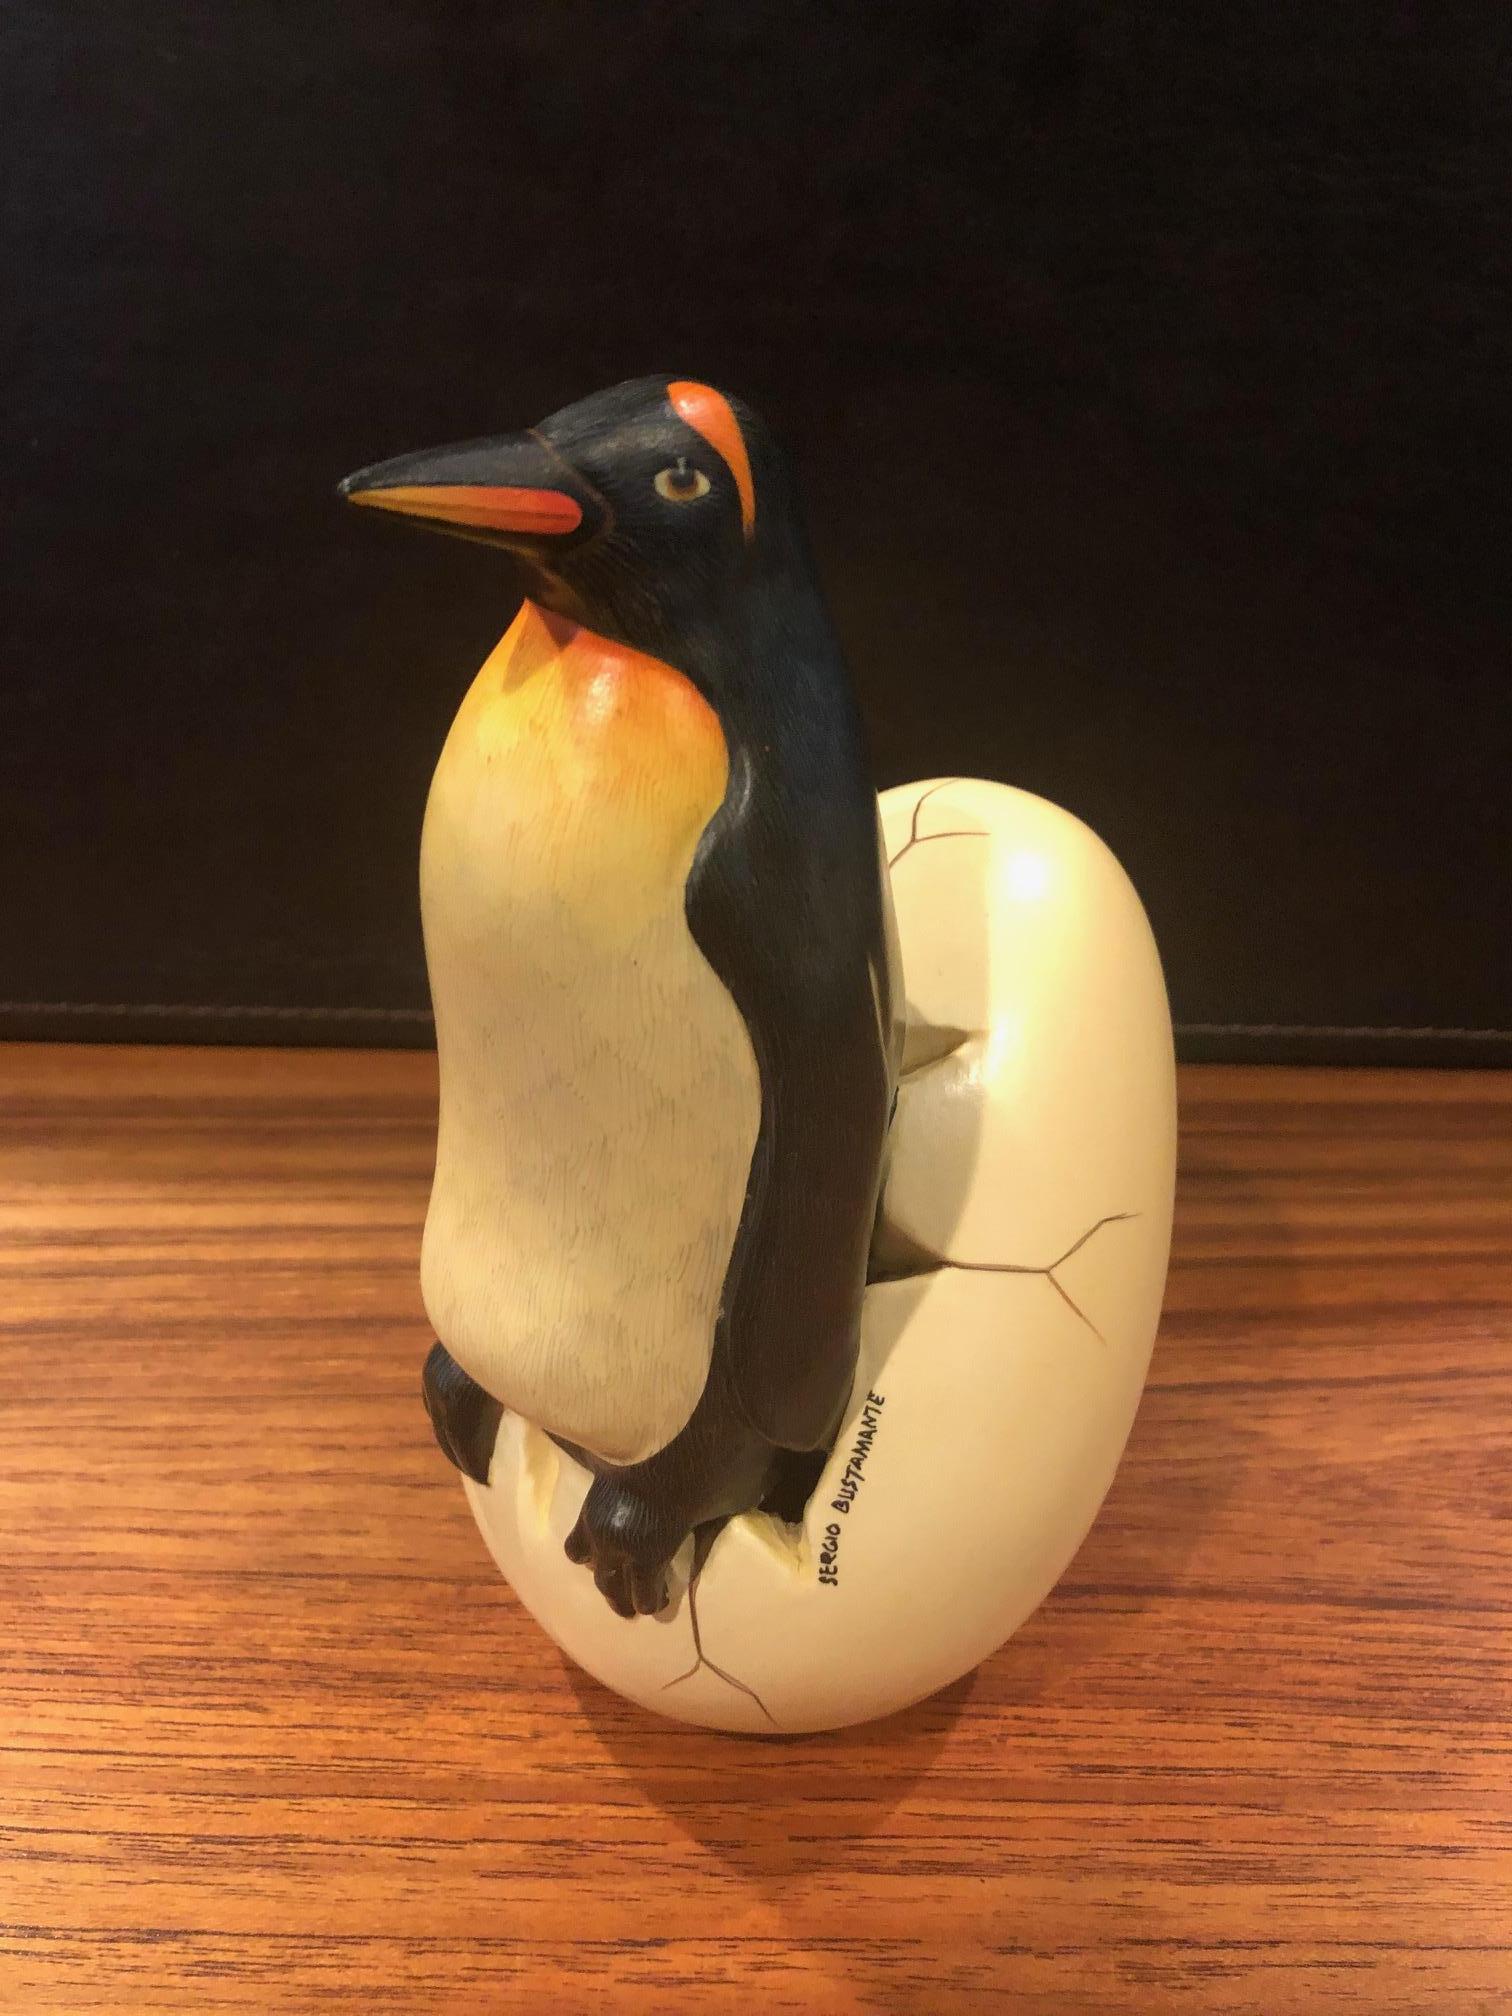 20th Century Whimsical Ceramic Hatching Penguin from Egg Sculpture by Sergio Bustamante